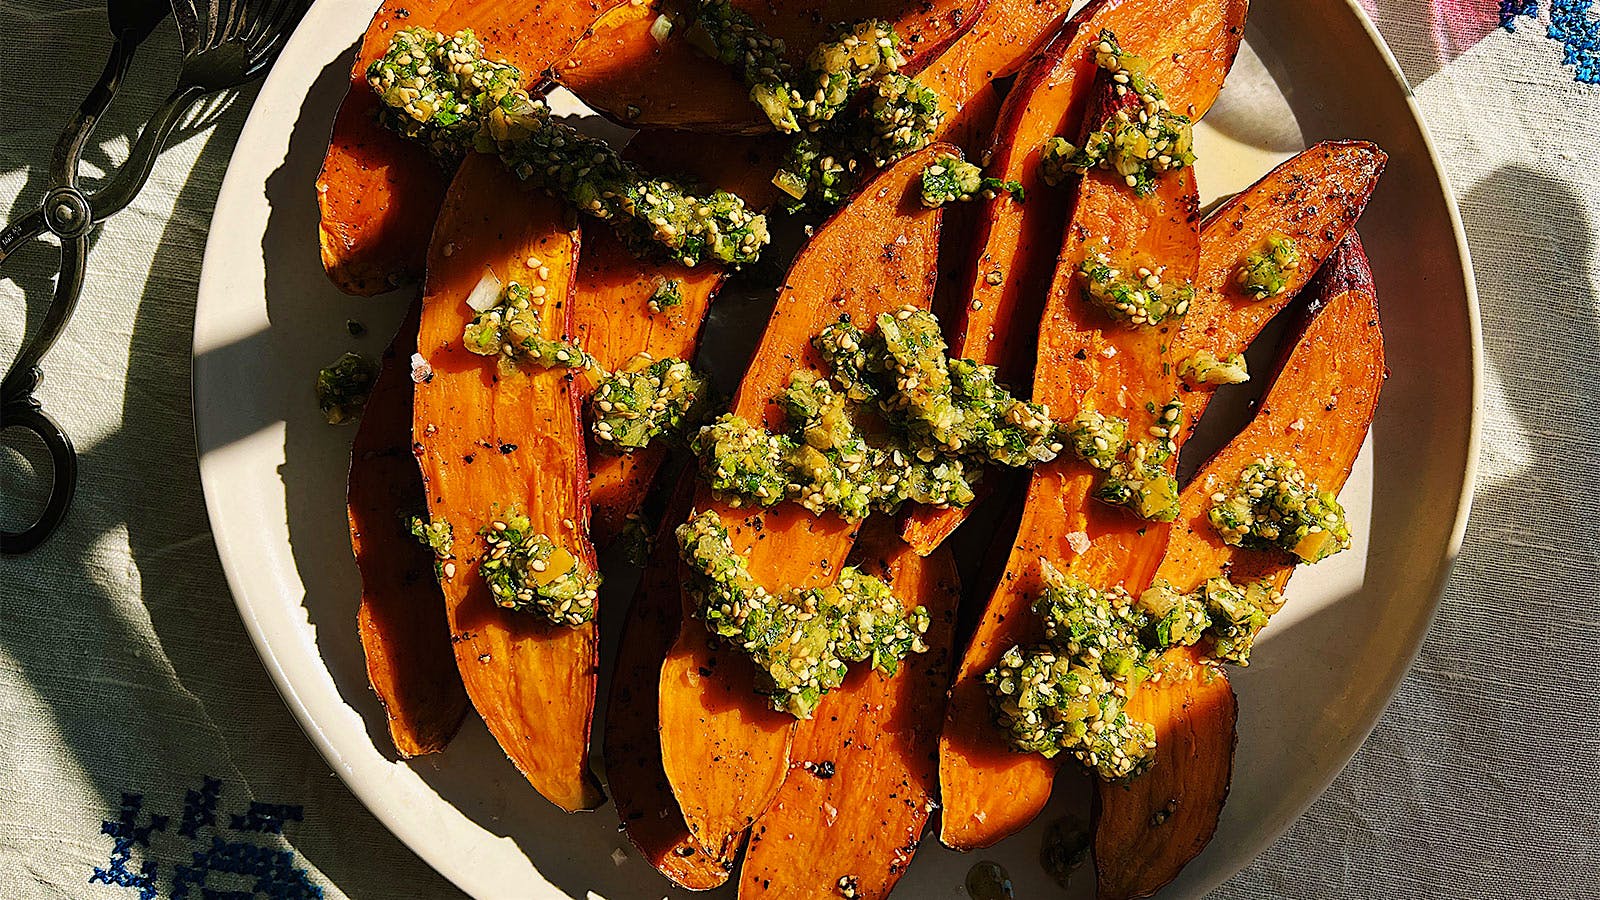 8 & $20: Roasted Sweet Potatoes with Preserved Lemon Dressing